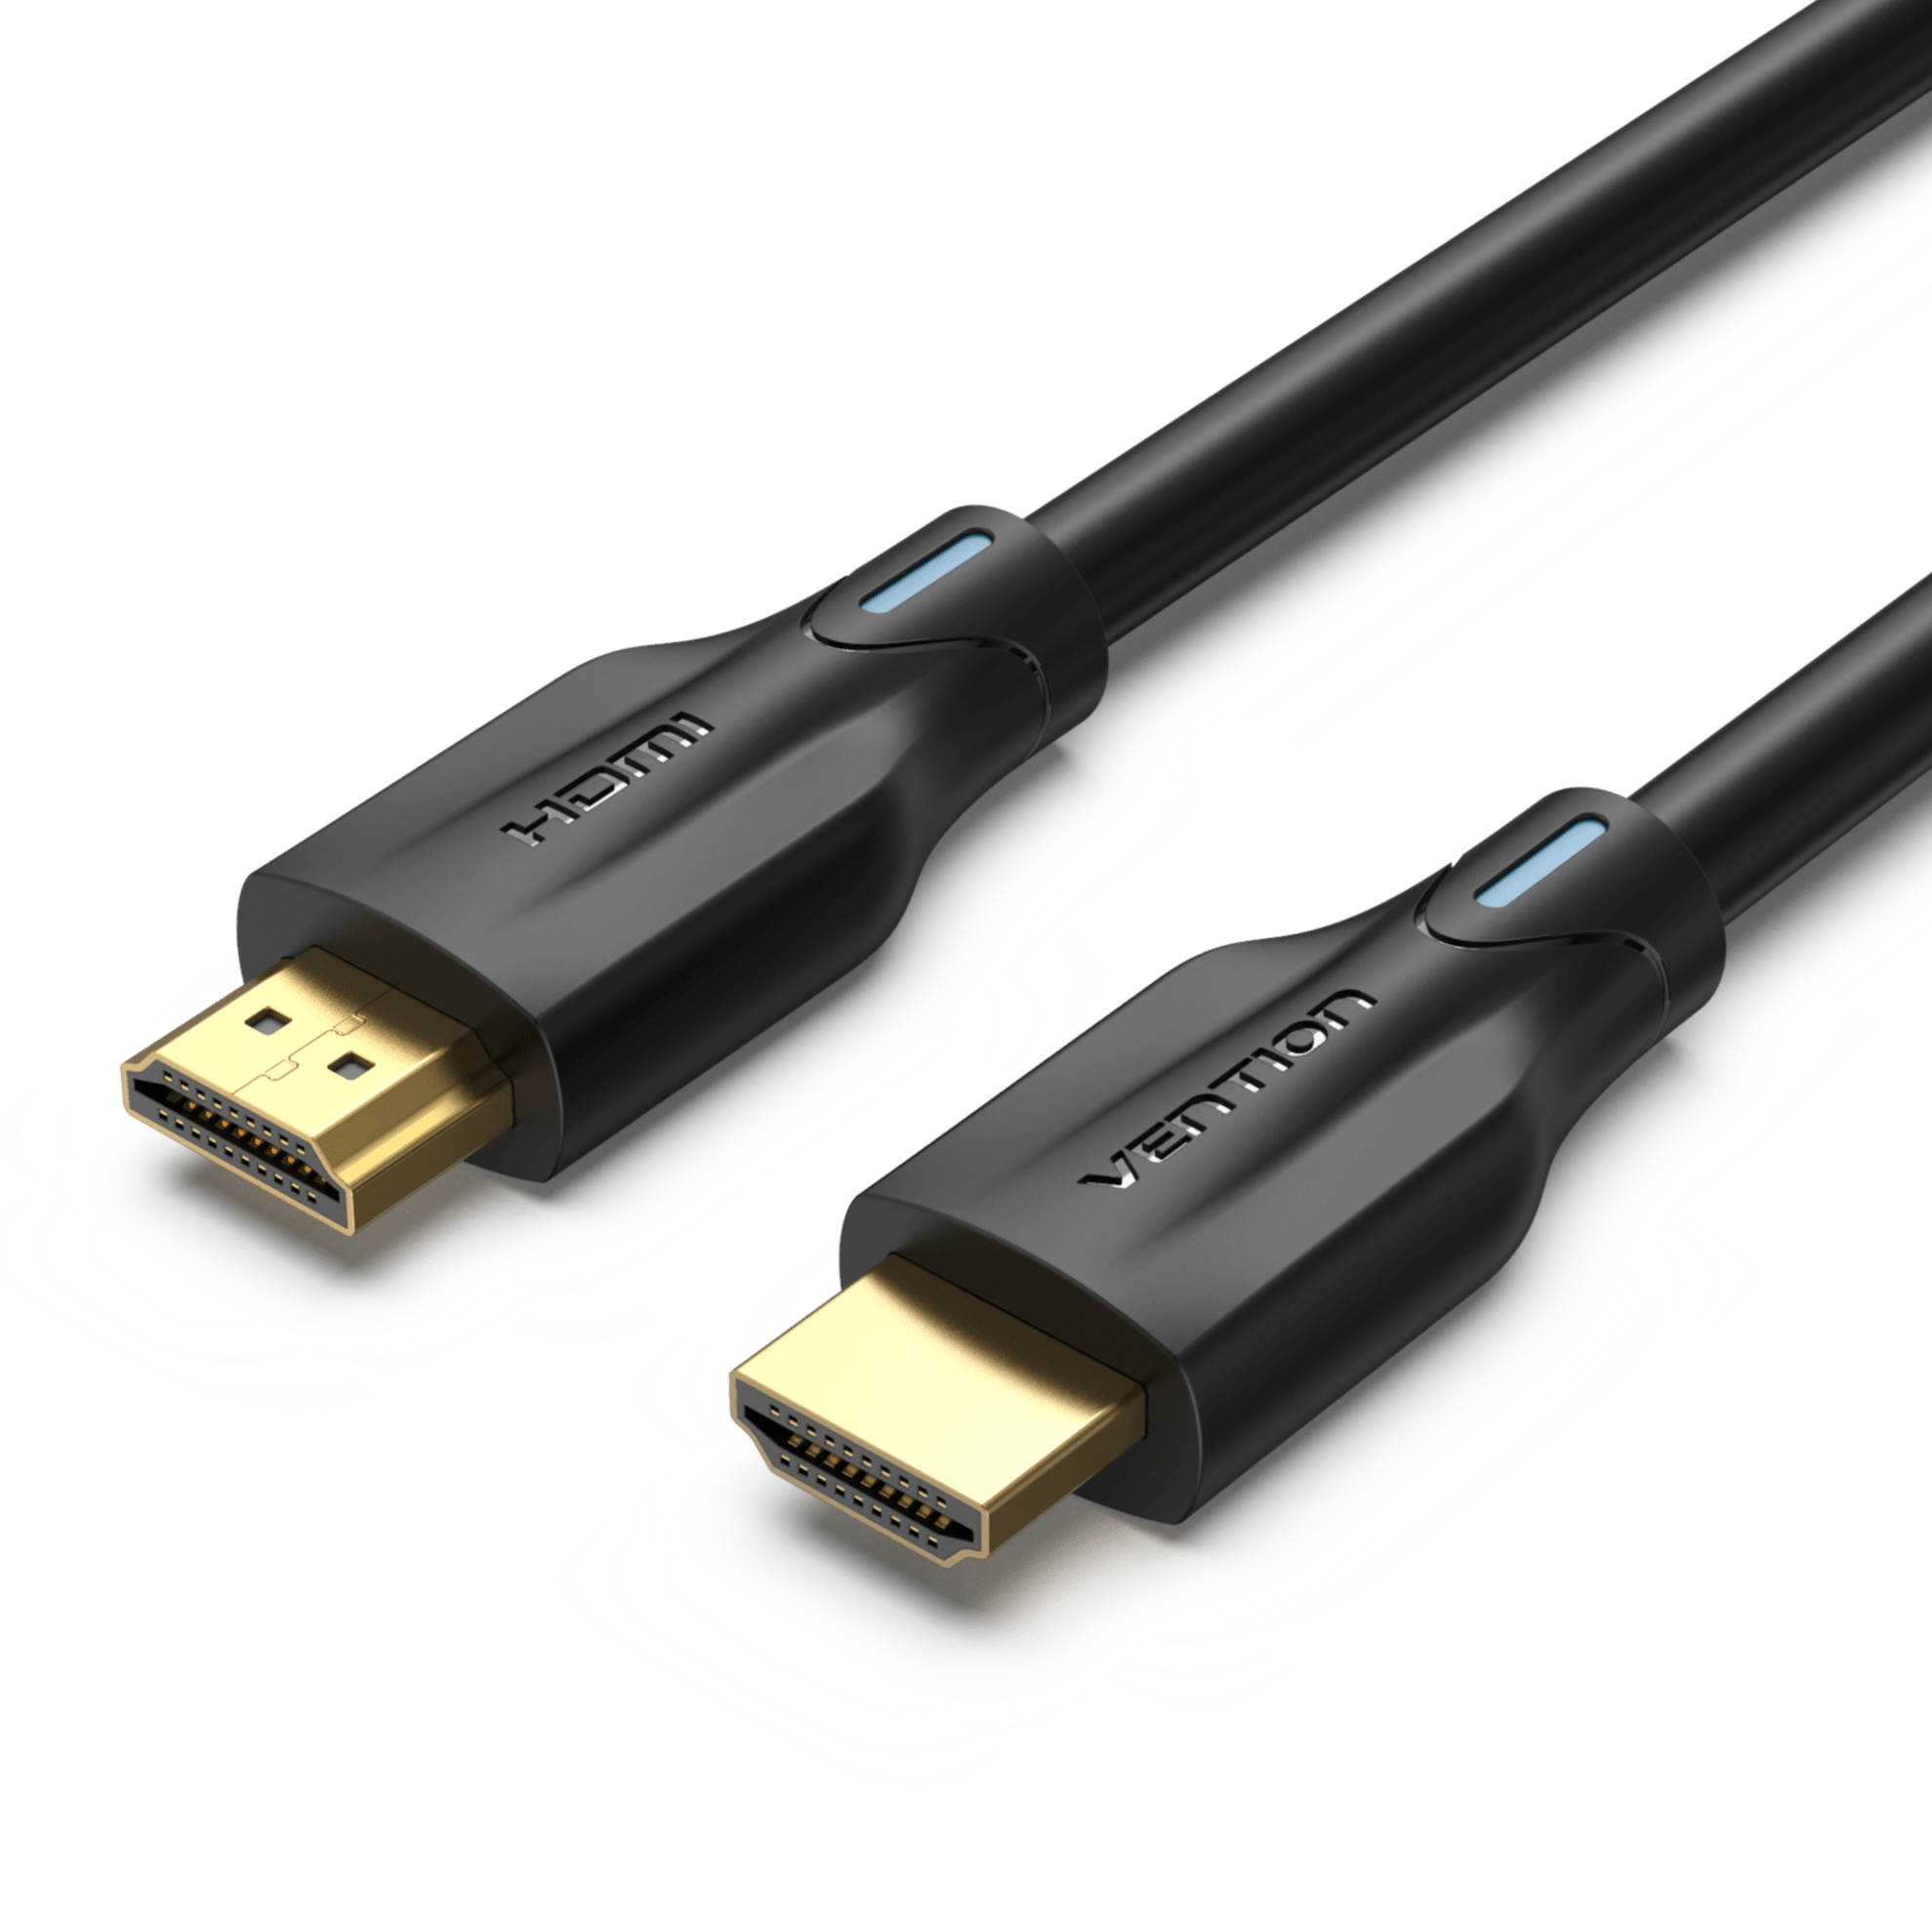 HDMI Cable Manufacturer and Supplier - Vention